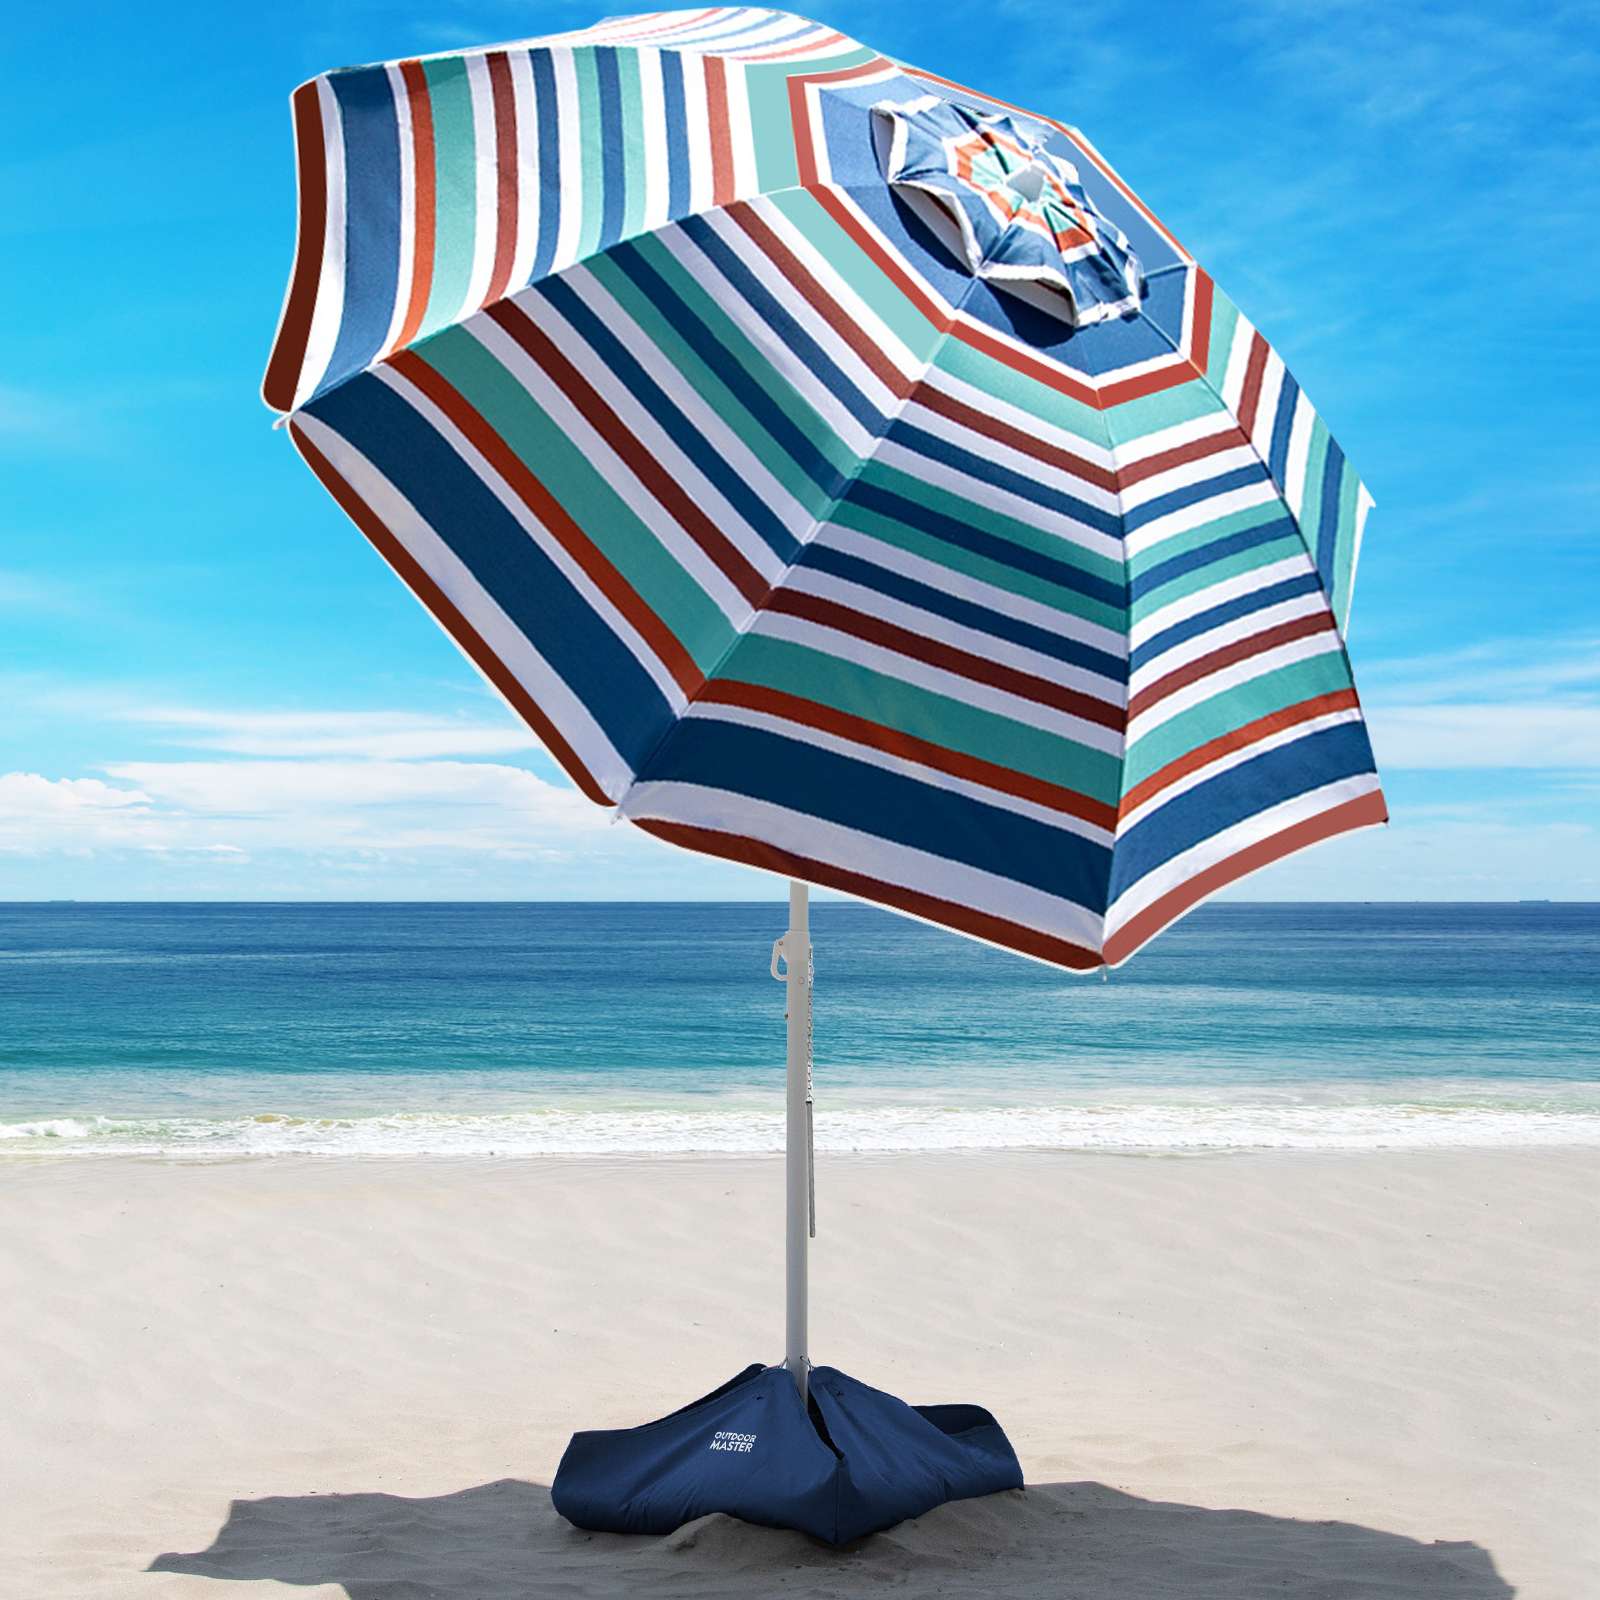 Durable Beach Umbrella Storage Bag for Easy Transportation and Protection